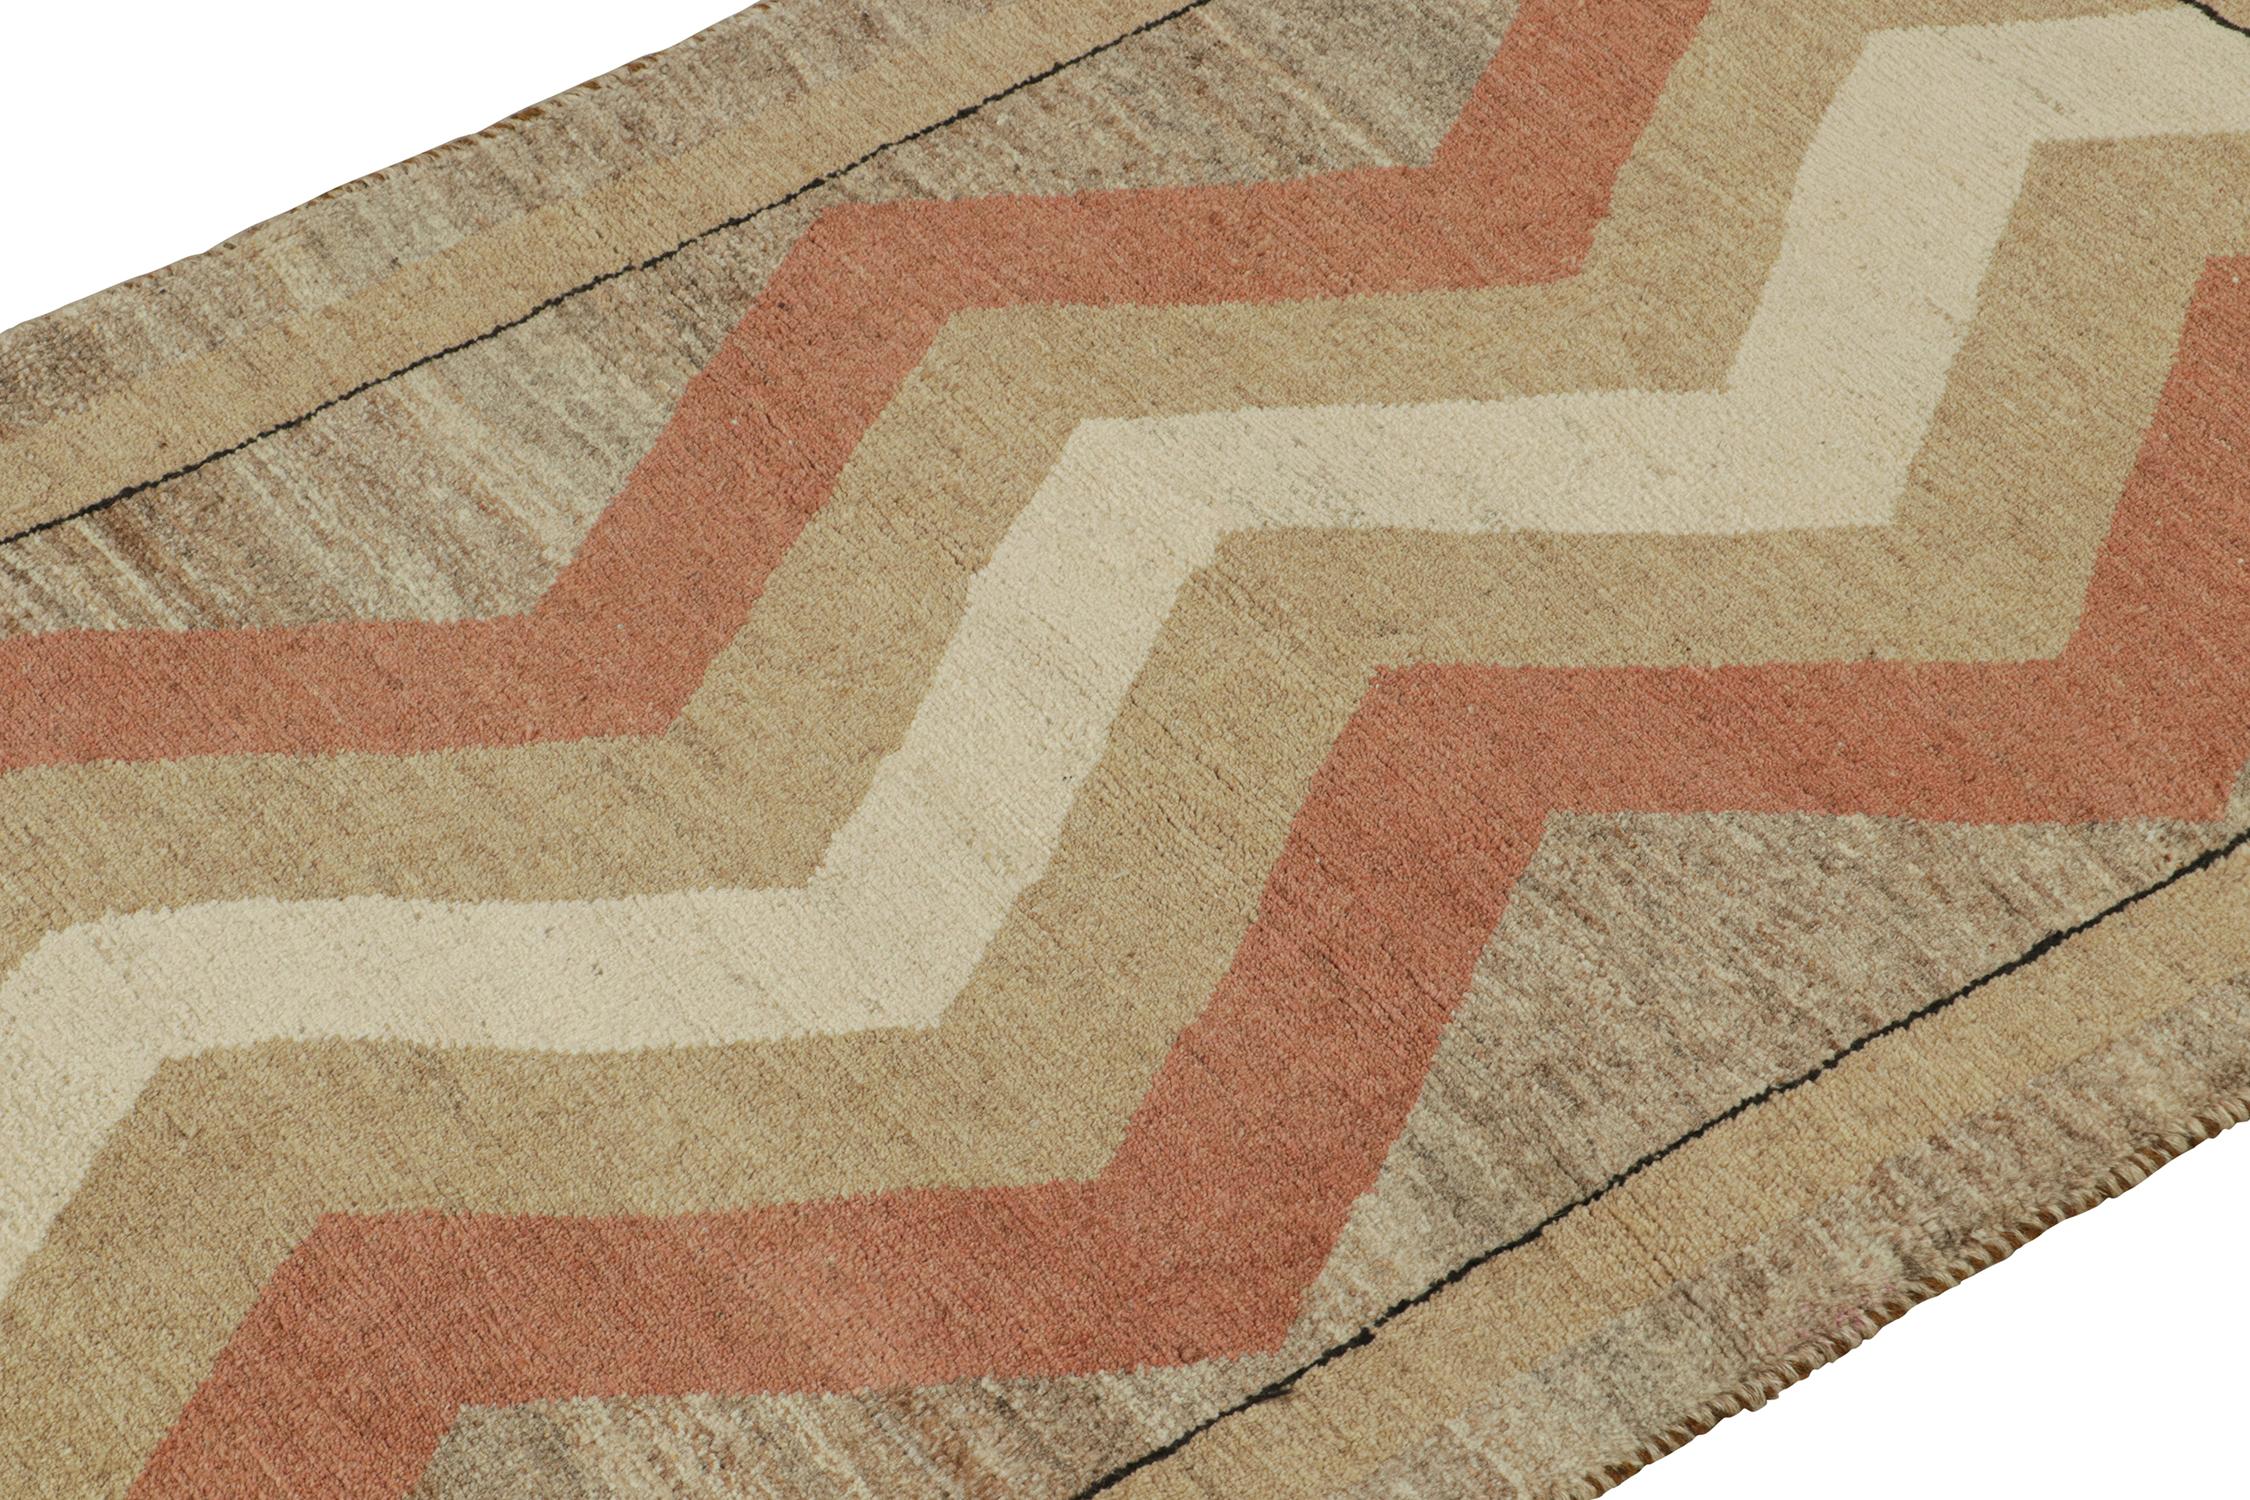 Turkish Vintage Gabbeh Rug in Beige-Brown and Red Chevron Patterns by Rug & Kilim For Sale